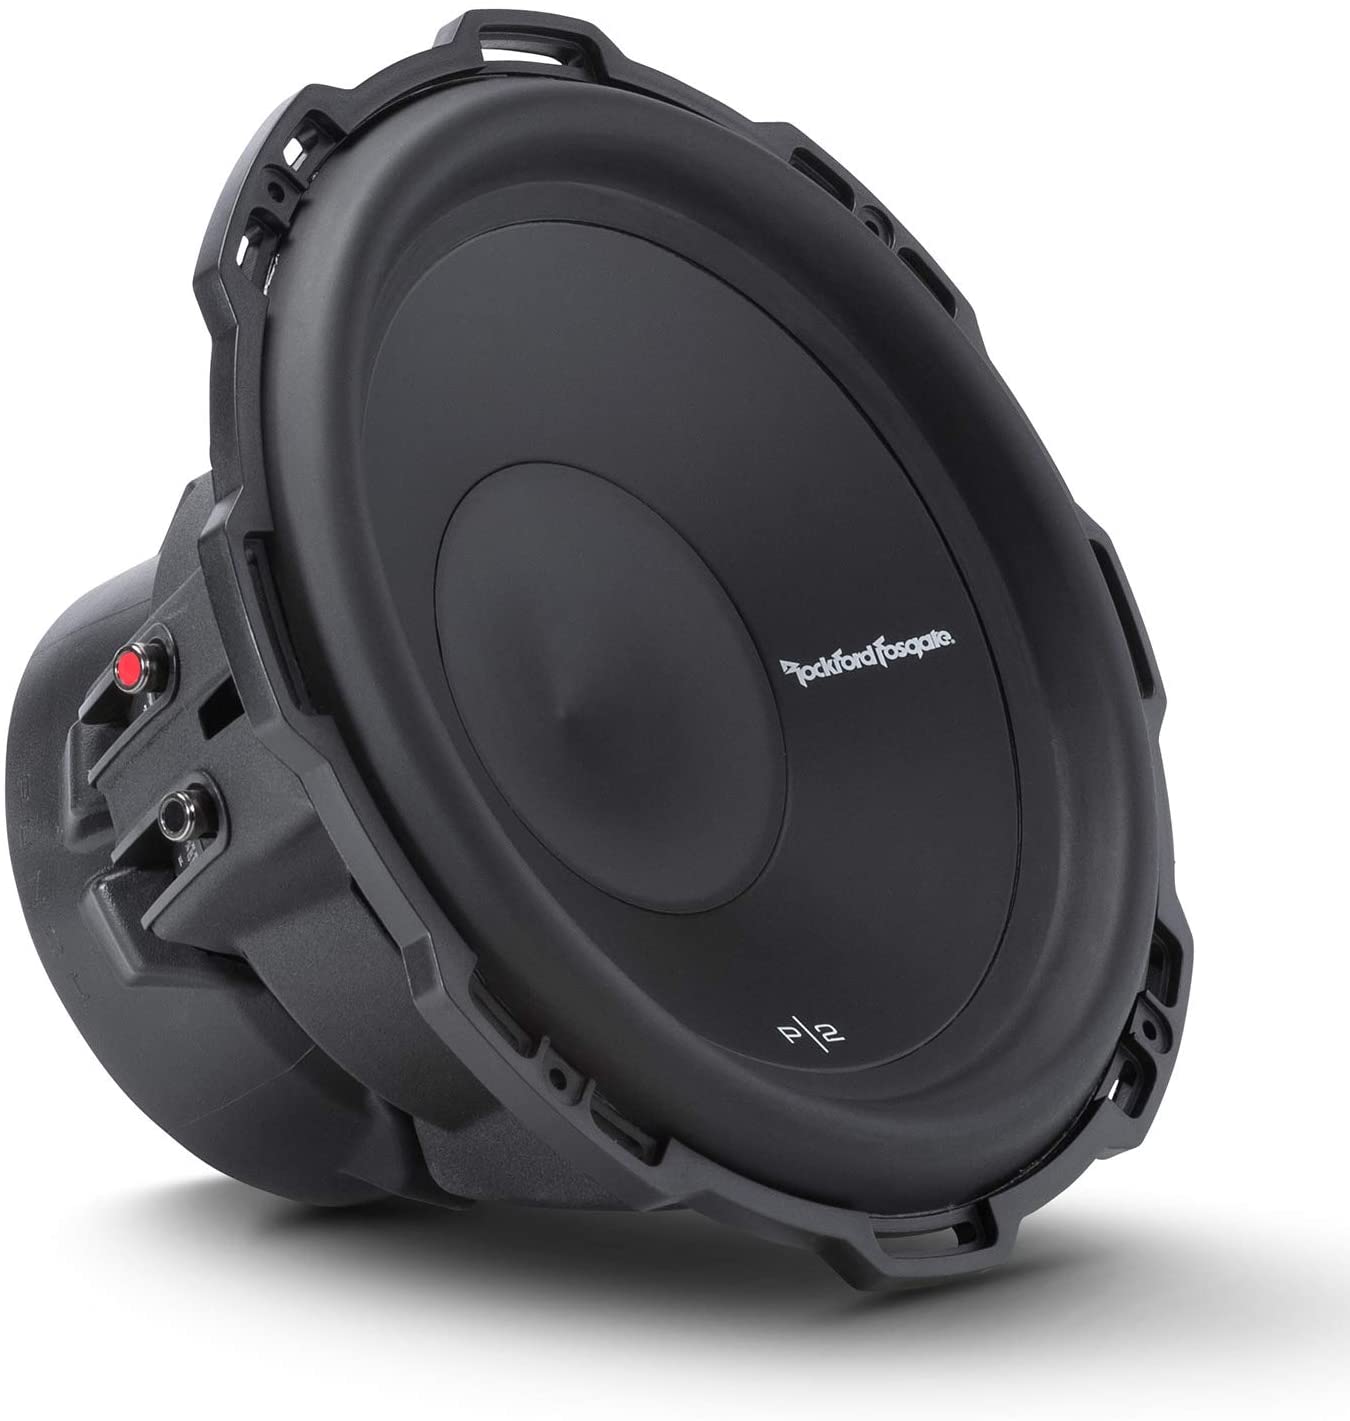 2 Rockford Fosgate P2D2-10 10" 1200w Dual Subwoofers+ Absolute DSS10 Sealed Sub Box Enclosure